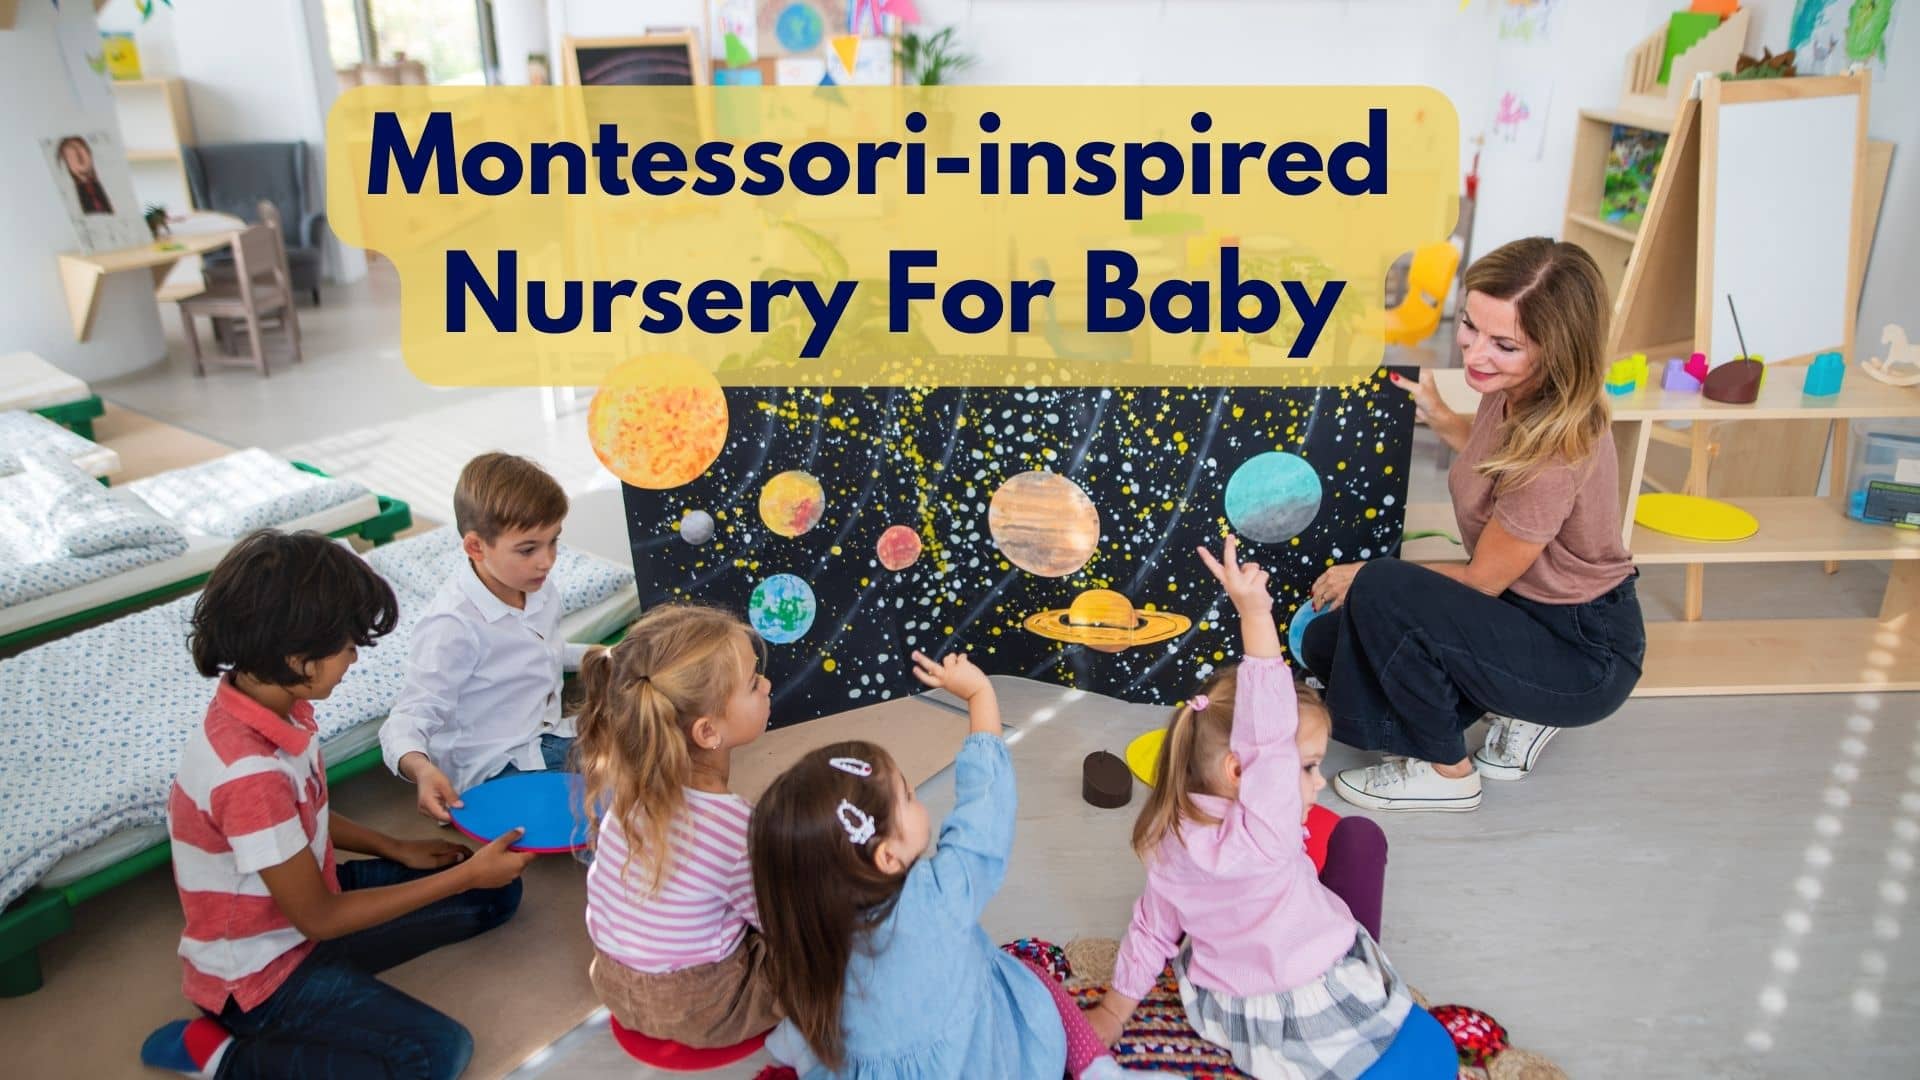 How To Create A Montessori Playroom For Baby?